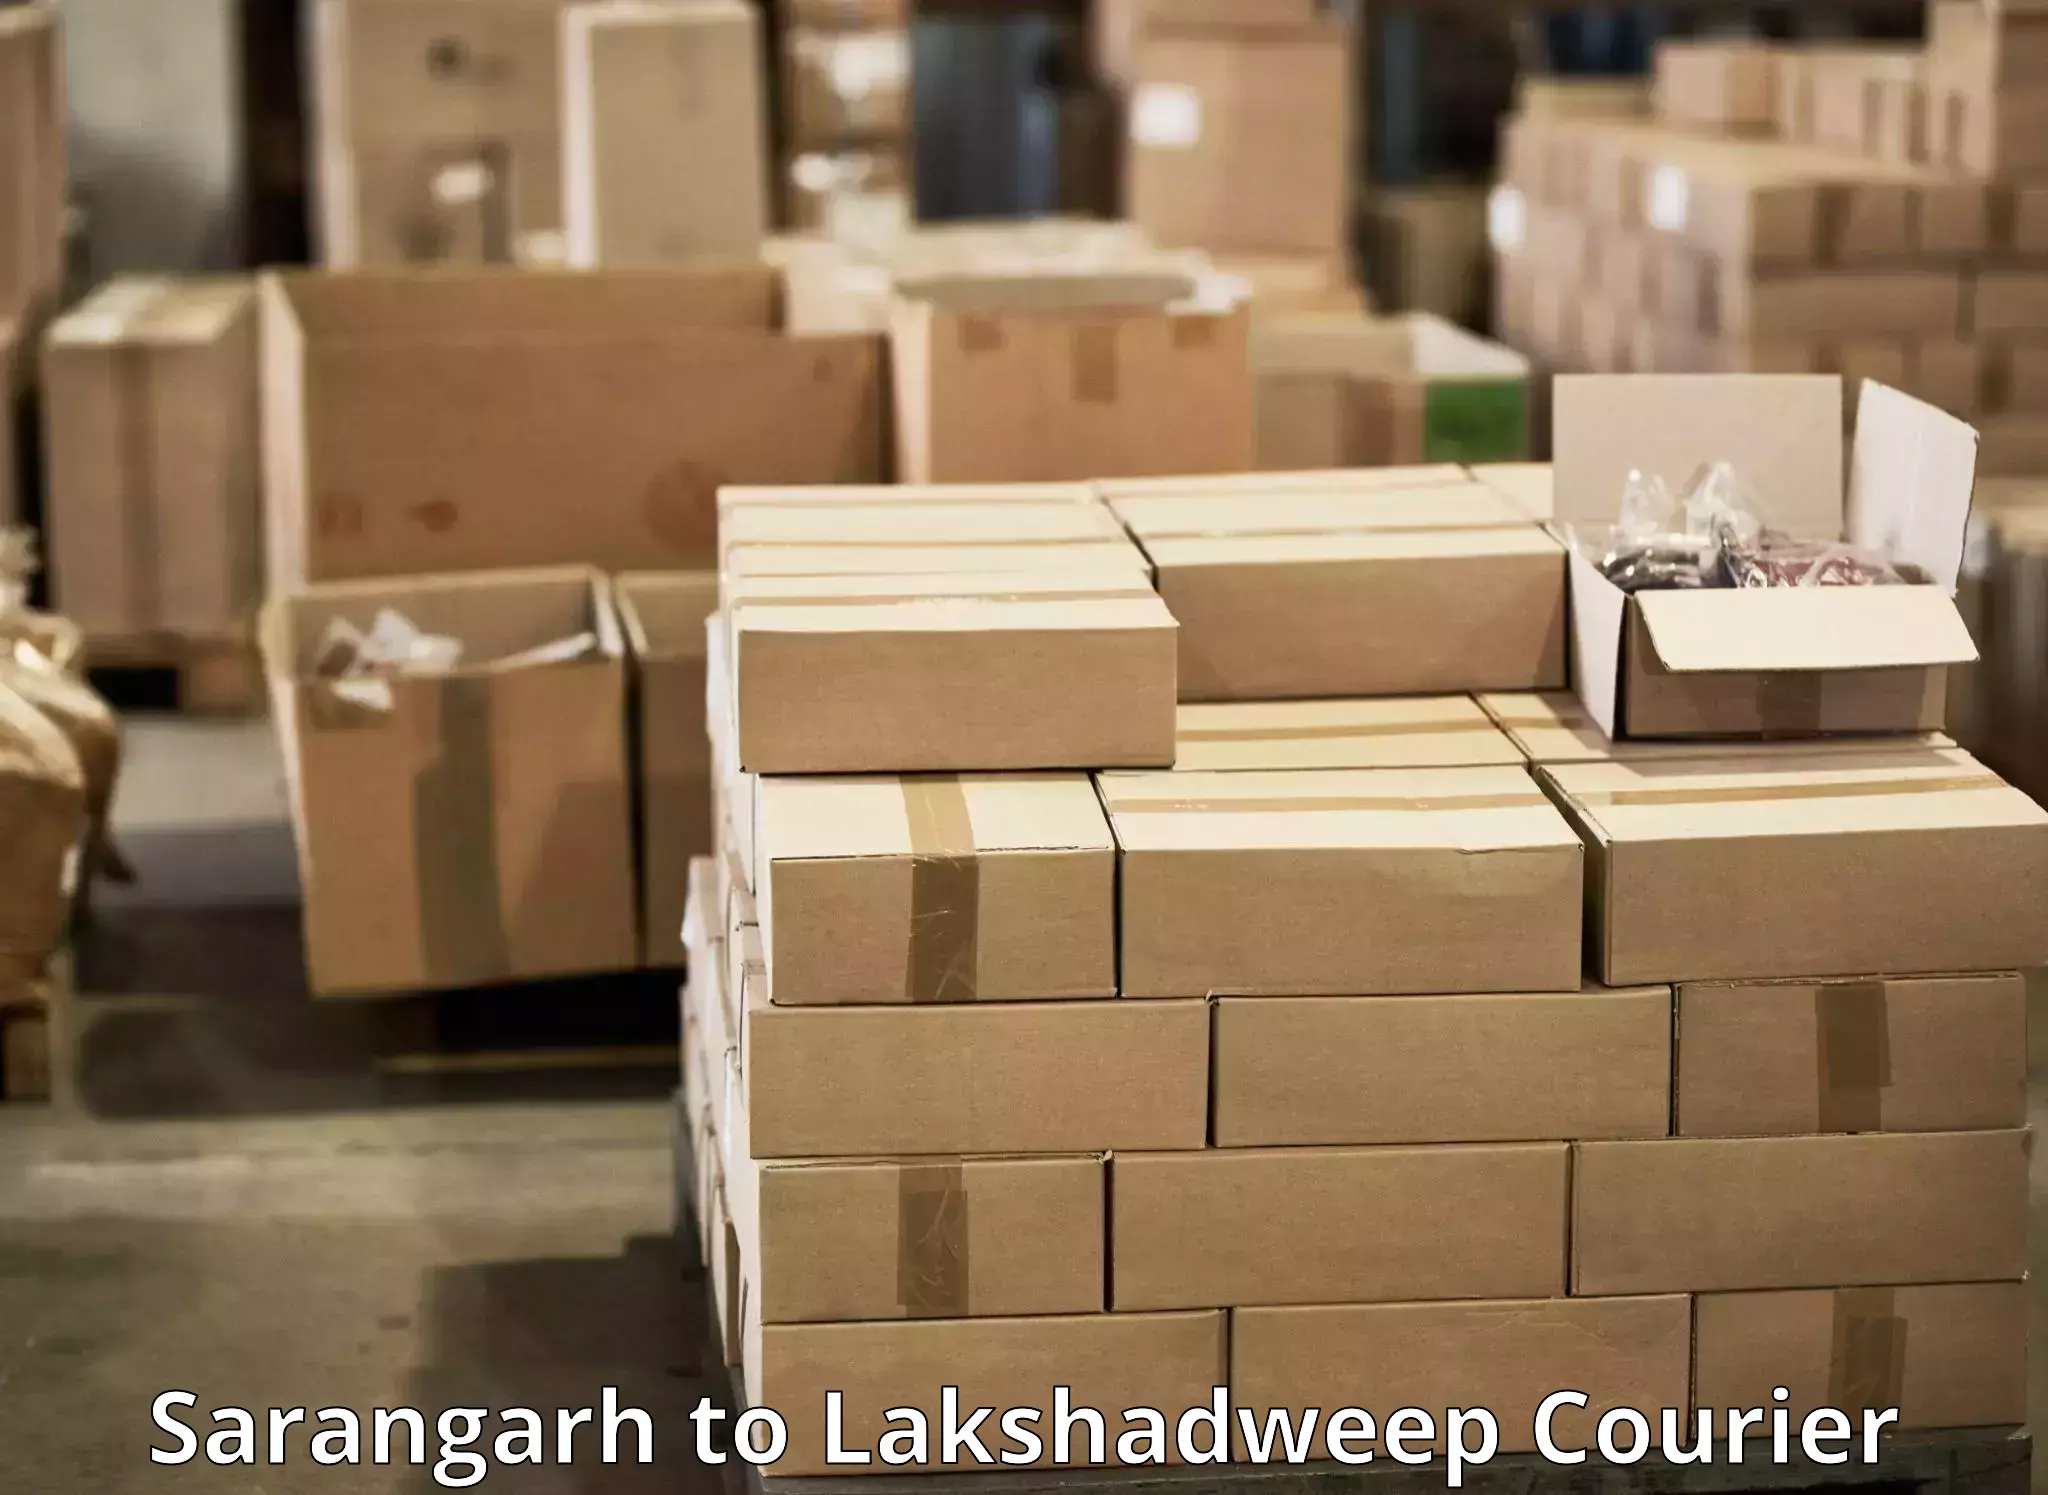 Sustainable courier practices Sarangarh to Lakshadweep